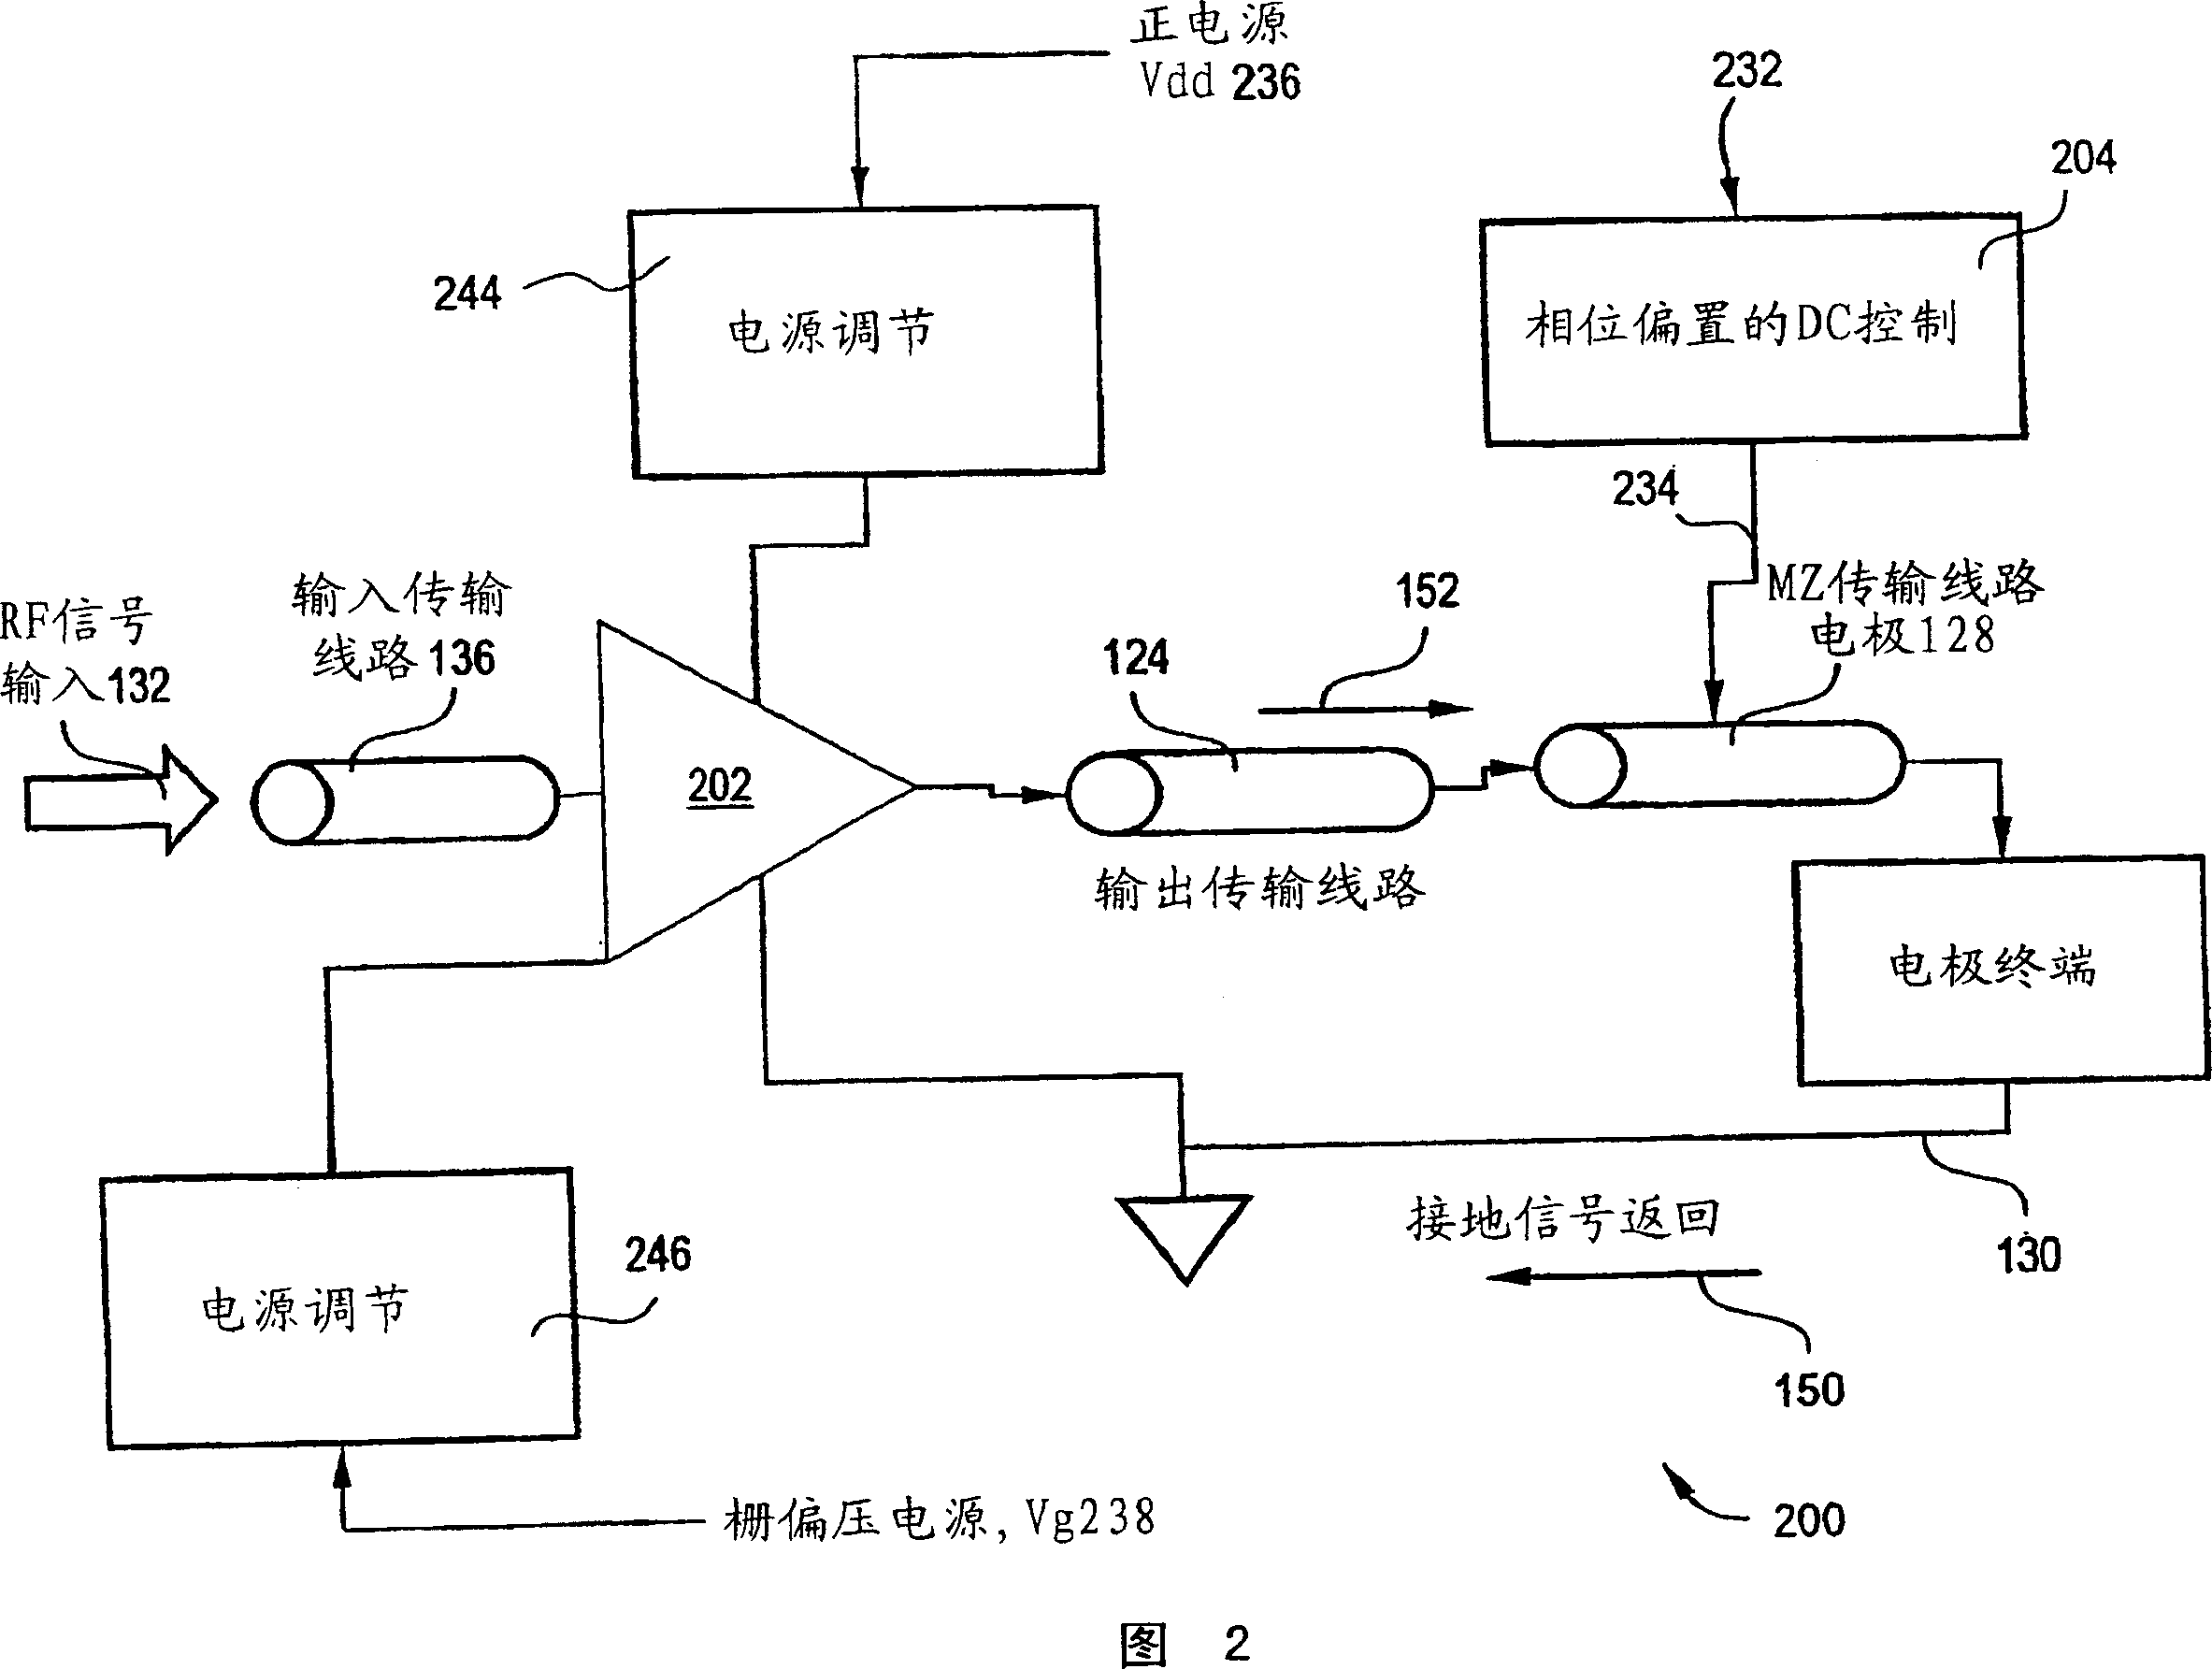 Wideband optical modulator with polymer waveguide and drive amplifier integrated on flexible substrate